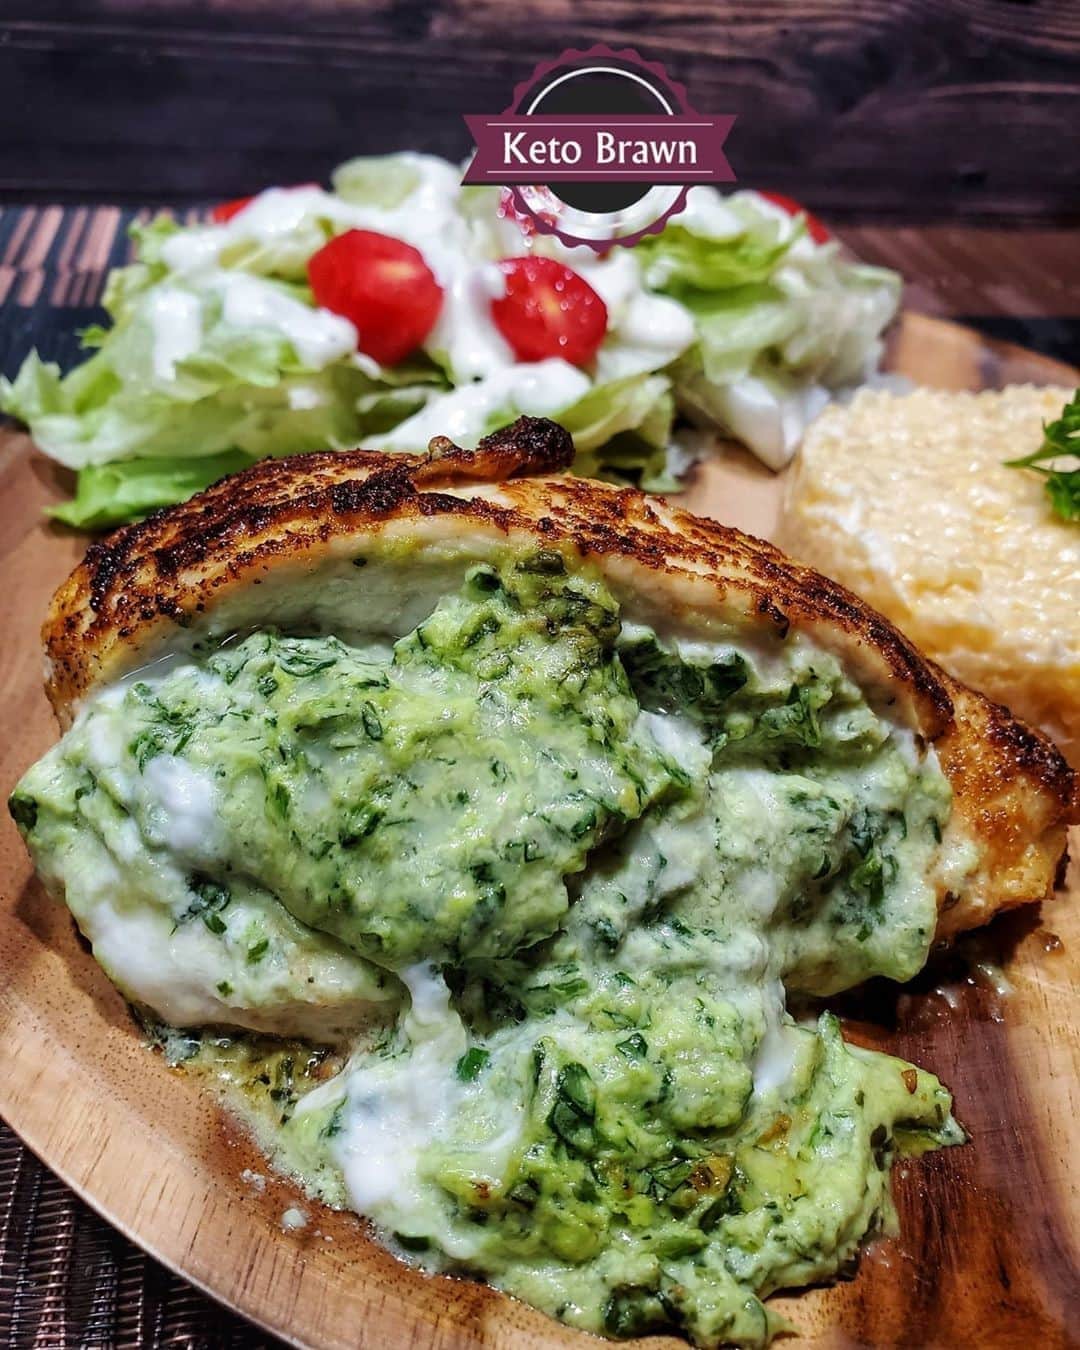 Flavorgod Seasoningsさんのインスタグラム写真 - (Flavorgod SeasoningsInstagram)「Stuffed Chicken Breasts w/Cheesy Cauli Rice by @ketobrawn This looks amazing!! They used Flavor God Lemon Garlic seasoning.⁠ -⁠ KETO friendly flavors available here ⬇️⁠ Click link in the bio -> @flavorgod⁠ www.flavorgod.com⁠ -⁠ A creamy rich filling that goes awesome with boneless yard bird bazoombas 😋😂😋🤣😋🤪🤪⠀⁠ ⠀⁠ The filling⠀⁠ 4oz cream chesse softened⠀⁠ 1 cup minced spinach⠀⁠ 1/2 cup shredded mozzarella ⠀⁠ 1/2 tbsp @flavorgod Lemon Garlic seasoning ⠀⁠ ⠀⁠ The cauli rice⠀⁠ 1 bag steamable cauli rice⠀⁠ 2oz cream cheese⠀⁠ 1/2 cup shredded colby jack ⠀⁠ Salt pepper to taste, we use @flavorgod Pink salt and Peppercorn⠀⁠ ⠀⁠ Heat up that cast iron and preheat oven to 400°⠀⁠ ⠀⁠ 3 boneless chicken breasts rubbed liberally with @flavorgod Everything seasoning ⠀⁠ ⠀⁠ 1) Cut the chicken horizontal to create a pocket, stuff each breast with the filling.⠀⁠ 2) Add a little olive oil to your cast iron on med high heat, Put in the chicken top side down for just a few minutes, flip and sear for another few minutes. ⠀⁠ 3) Transfer the skillet to the oven for 20 minutes .⠀⁠ 4) While that is finishing, nuke the cauli rice for 7.5 minutes, Add the cream cheese and 1/4 cup colby jack to a covered Tupperware. ⠀⁠ 5) When the cauli rice is done, dump it into the tupperware, add the other 1/4 cup cheese on top and cover. Give it a mix before serving. ⠀⁠ When chicken is done let eest for 10 minutes and enjoy. We also added a salad. ⁠ -⁠ Flavor God Seasonings are:⁠ 💥ZERO CALORIES PER SERVING⁠ 🔥0 SUGAR PER SERVING ⁠ 💥GLUTEN FREE⁠ 🔥KETO FRIENDLY⁠ 💥PALEO FRIENDLY⁠ -⁠ #food #foodie #flavorgod #seasonings #glutenfree #mealprep #seasonings #breakfast #lunch #dinner #yummy #delicious #foodporn」10月3日 10時01分 - flavorgod